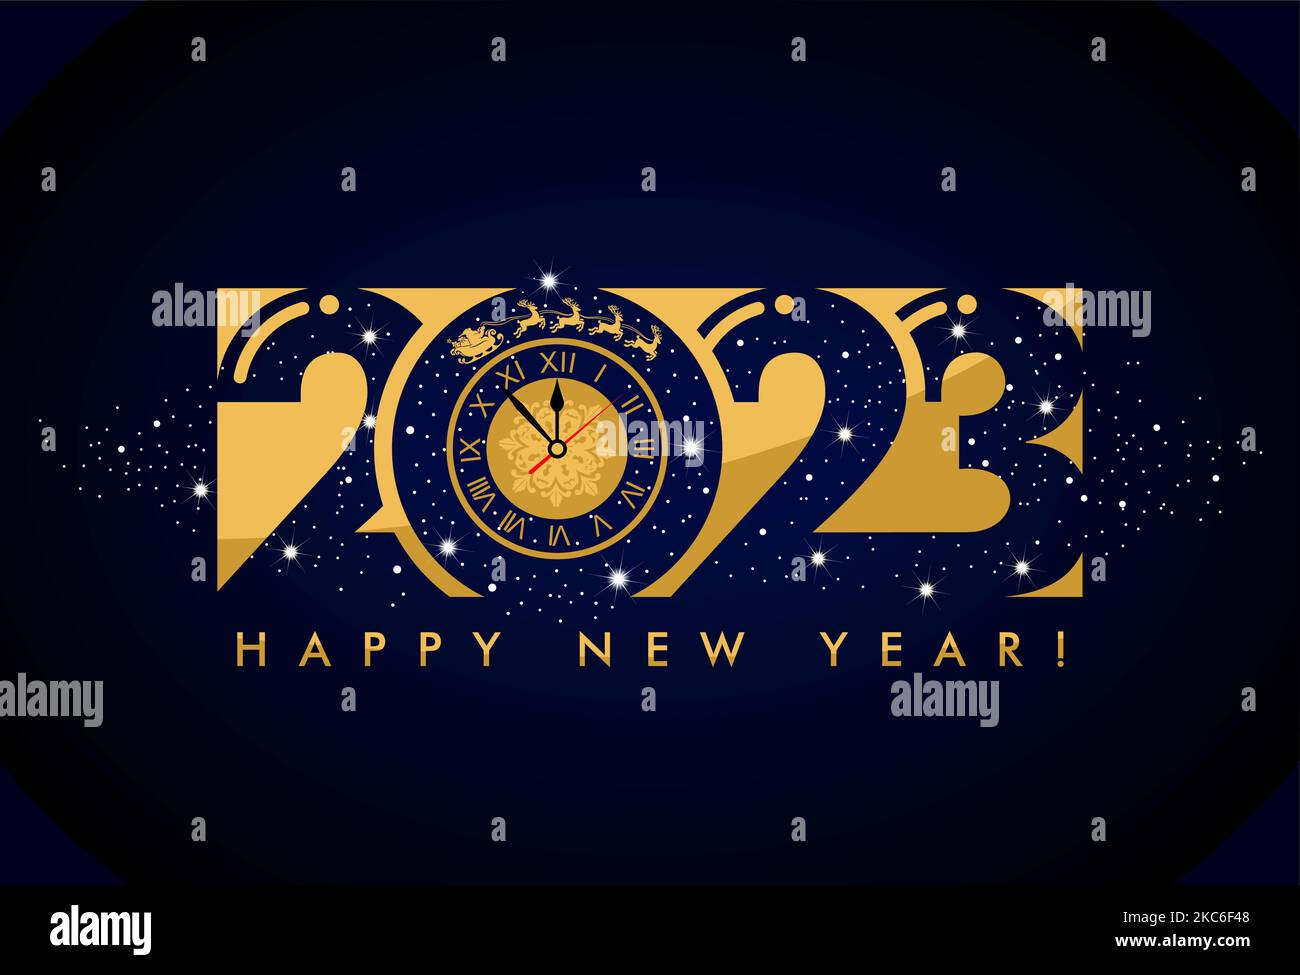 2023 New Year night starry background. Silhouette of Santa Claus in sleigh with reindeer over Christmas clock. Vector template for greeting card, post Stock Vector